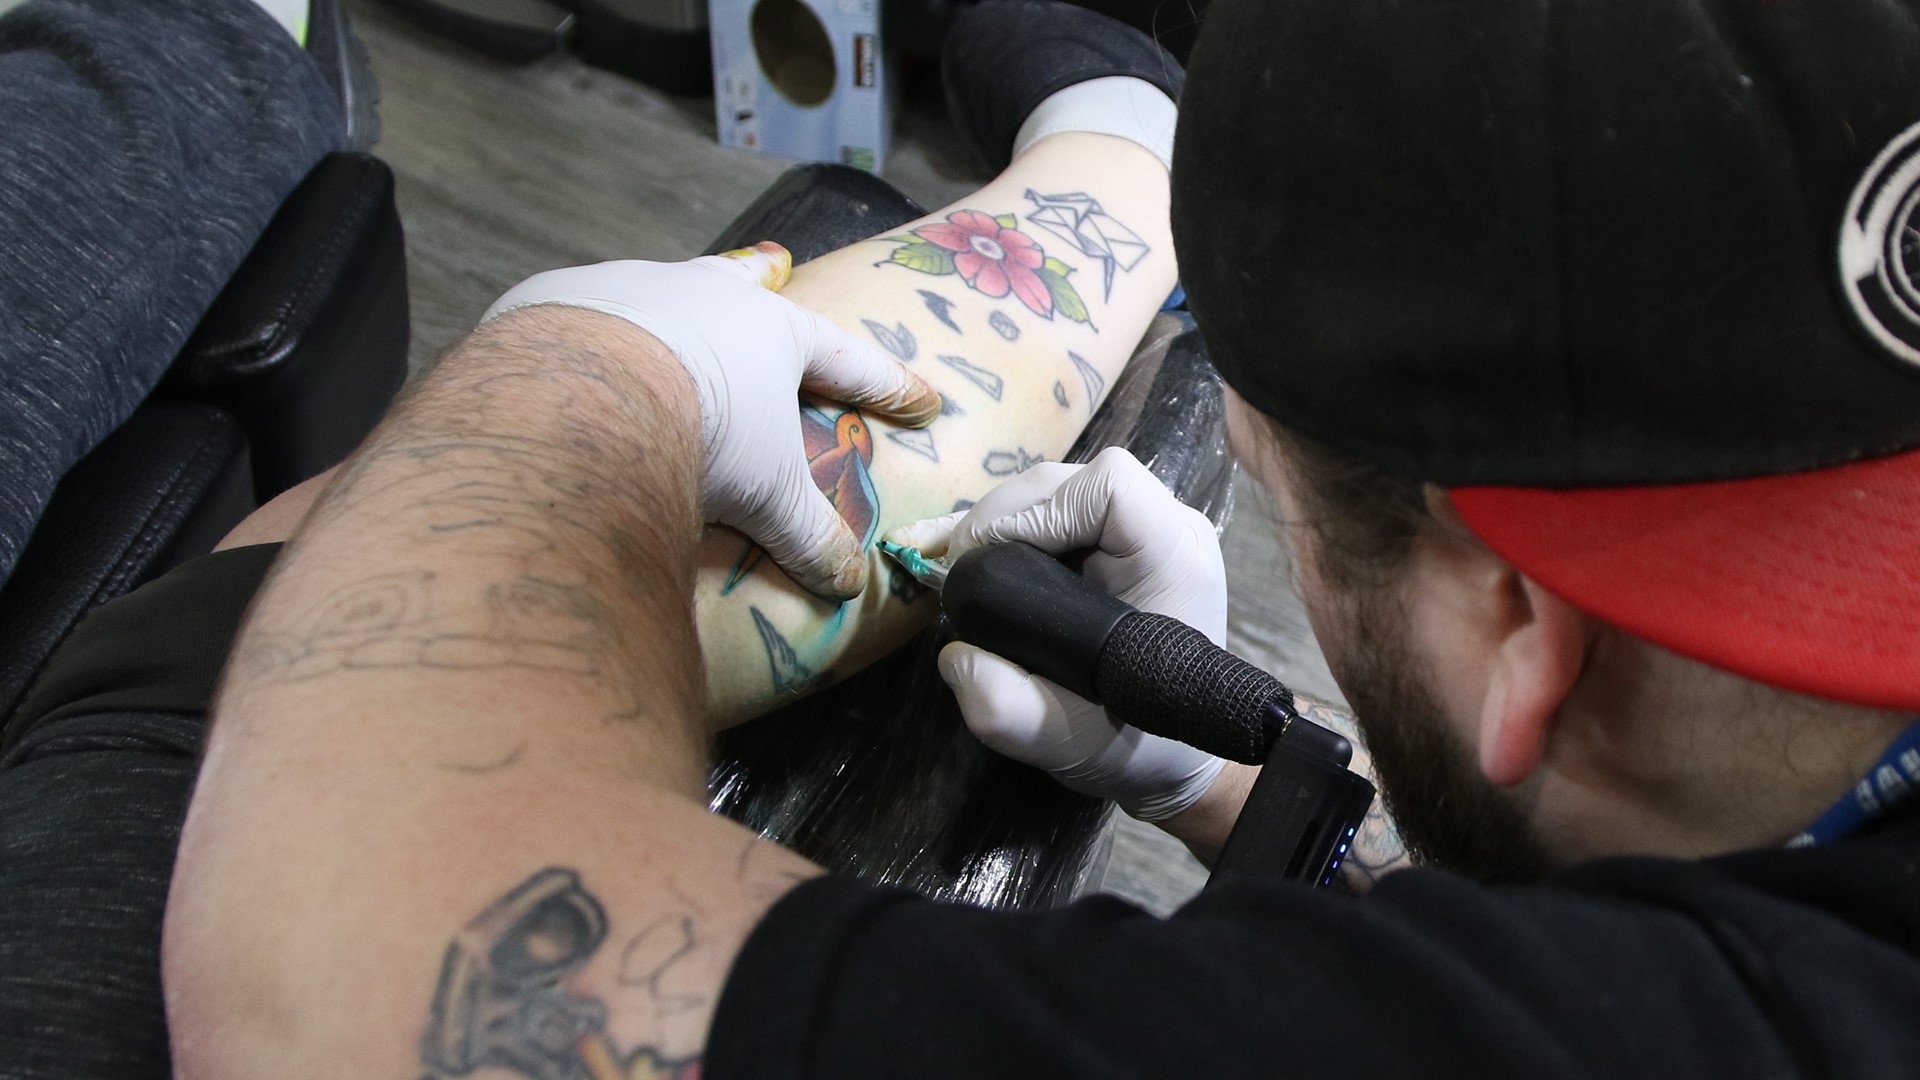 Friday the 13th tattoo traditions run skin deep